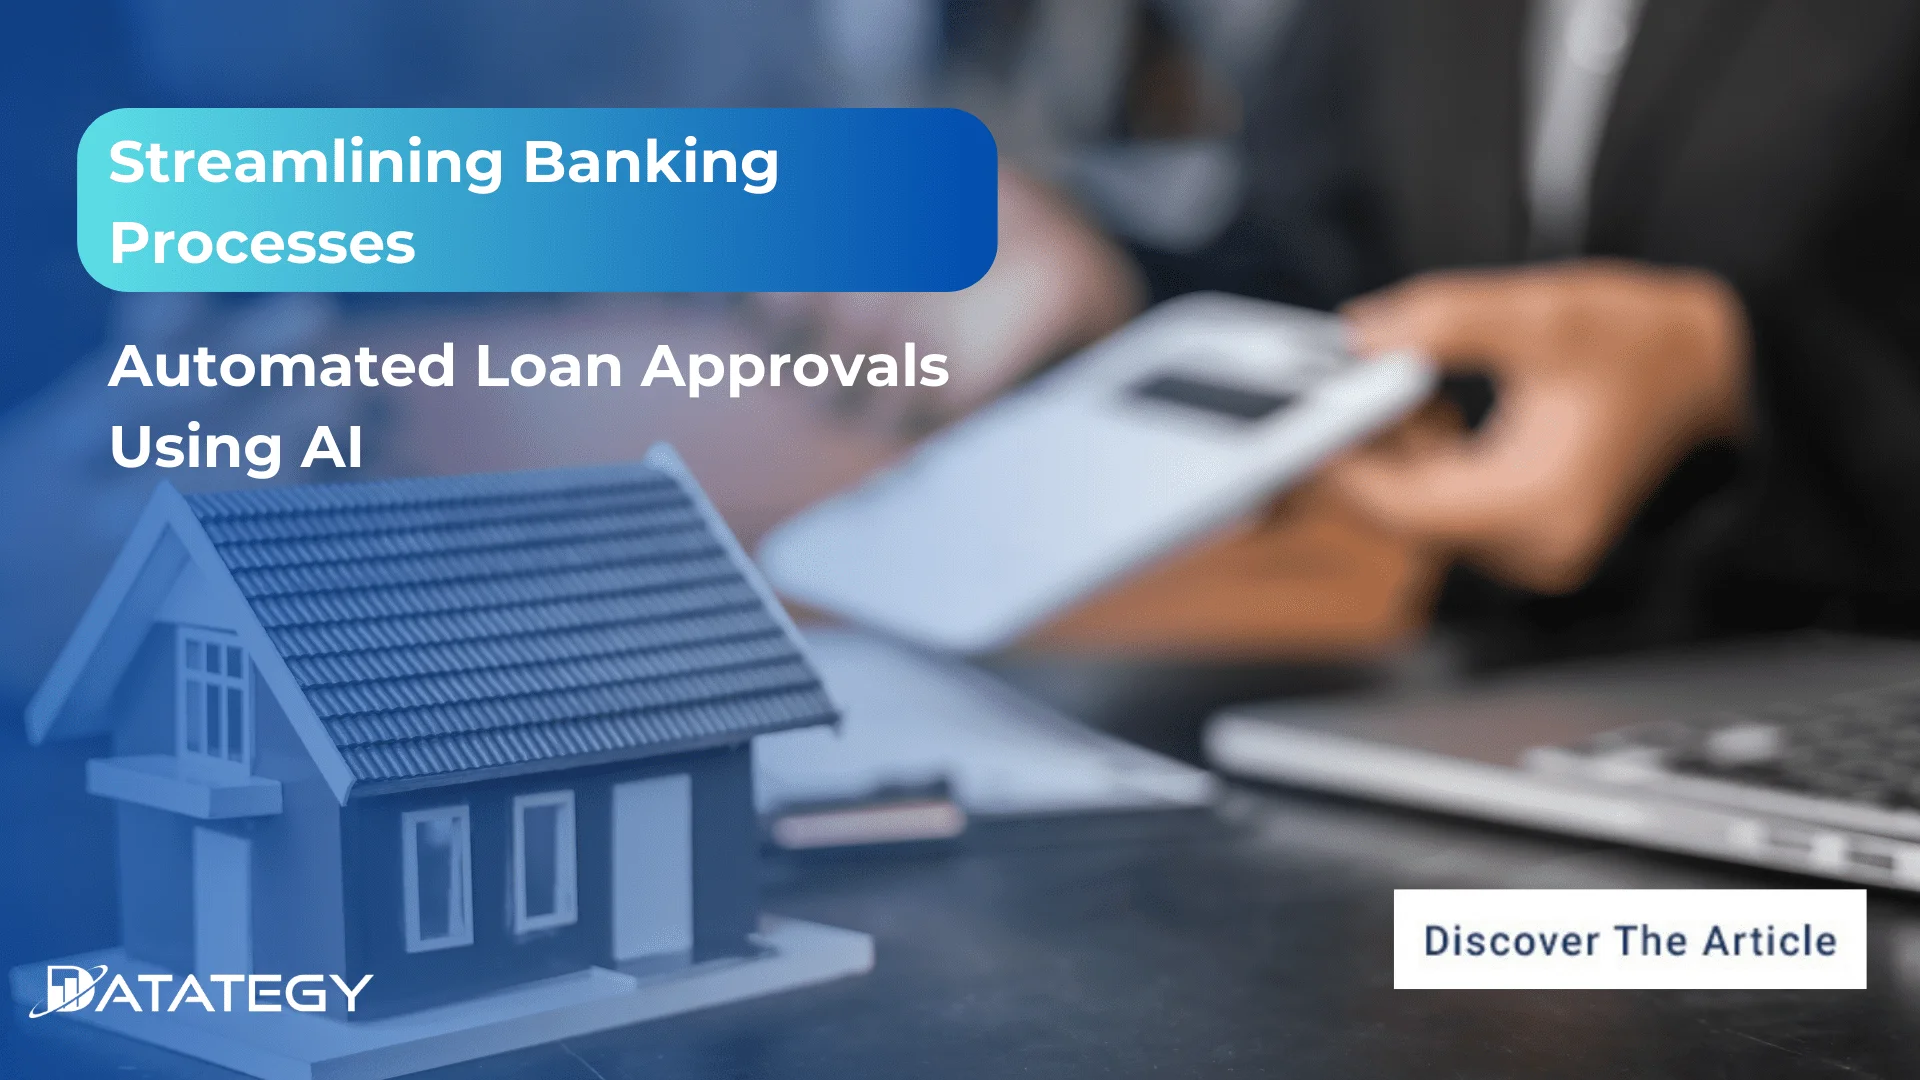 Streamlining Banking Processes: Automated Loan Approvals Using AI